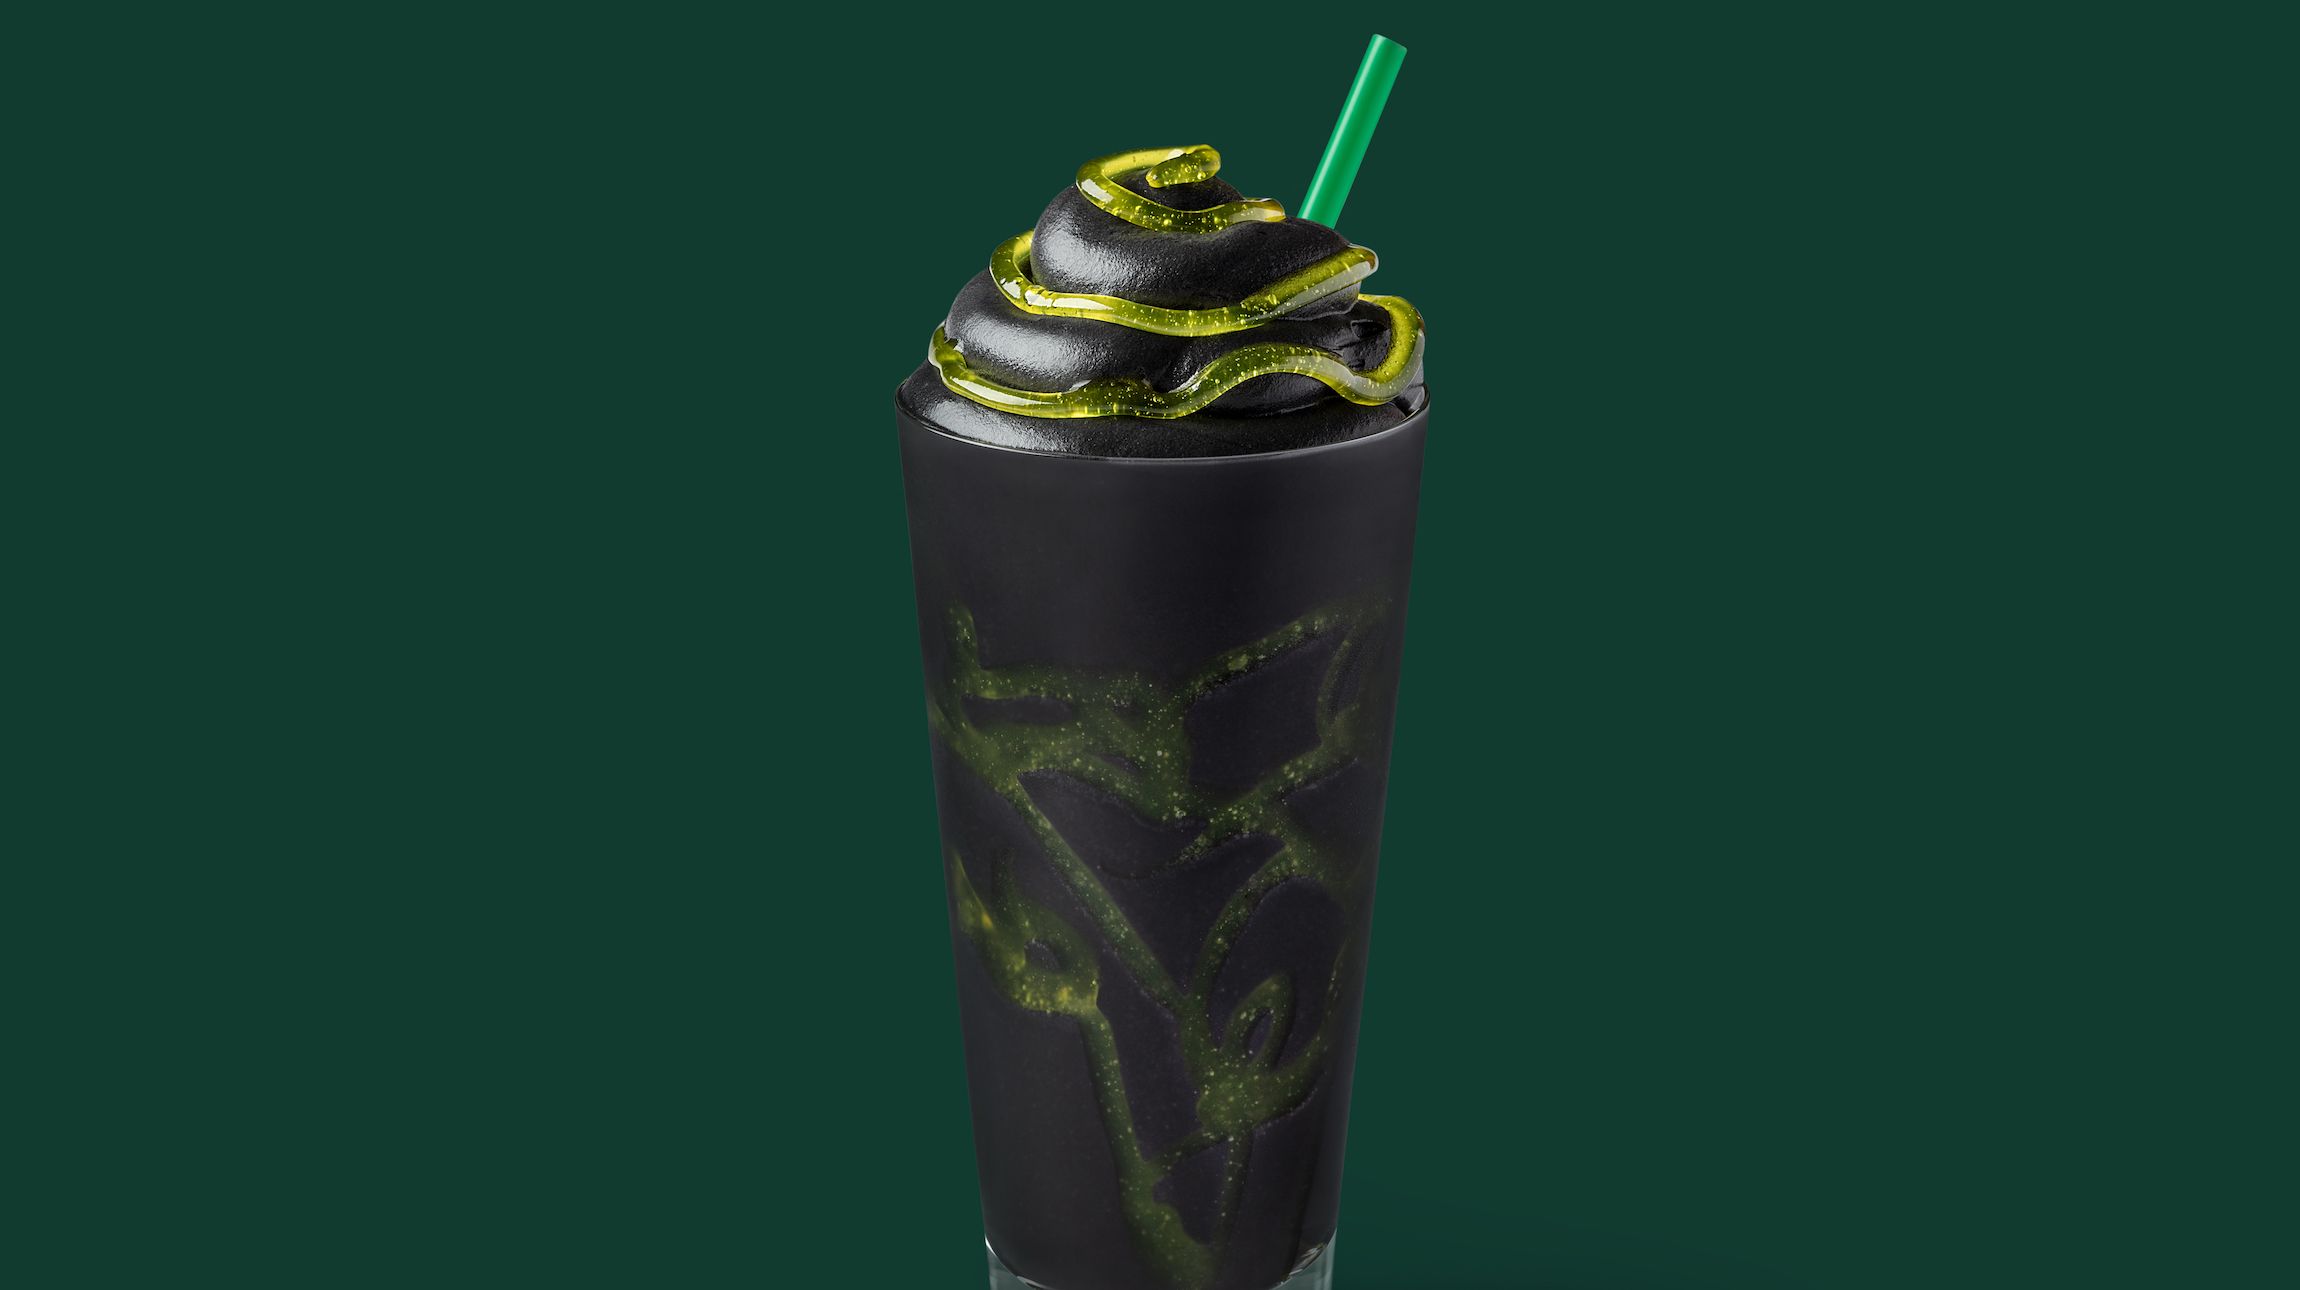 Starbucks Has a New Phantom Frappuccino That’s All Black and Covered